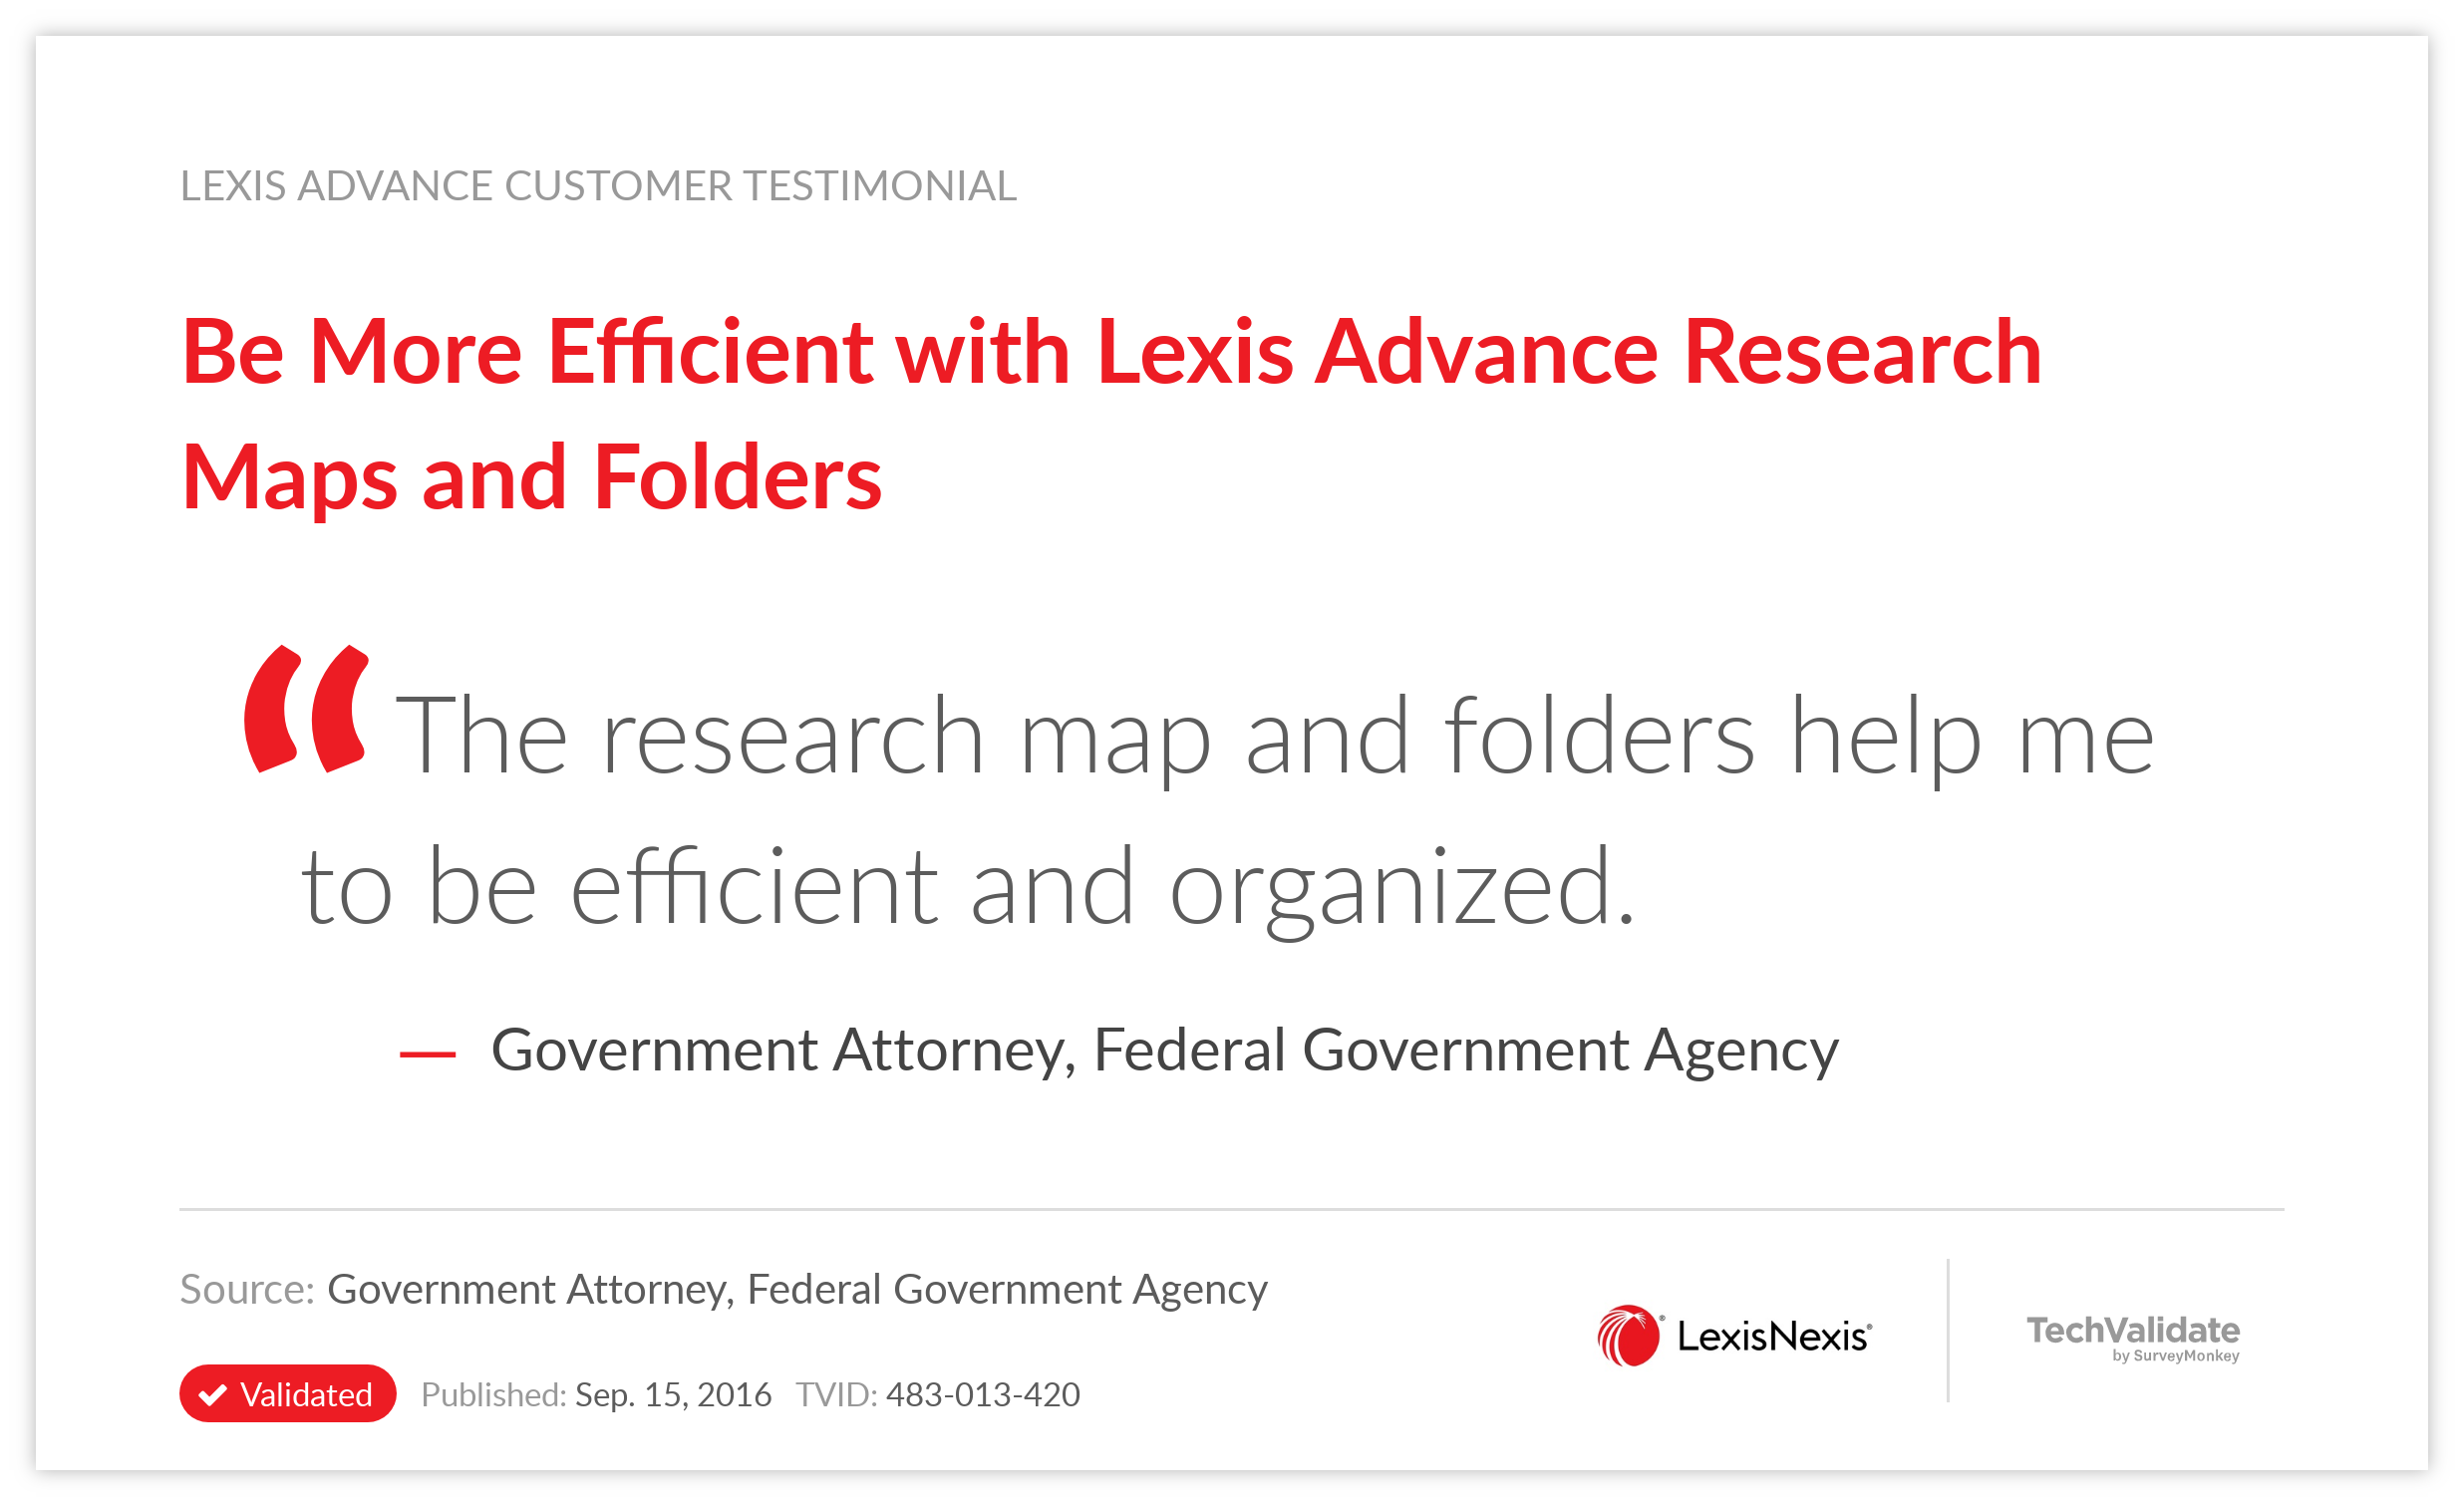 Be More Efficient with Lexis Advance Research Maps and Folders